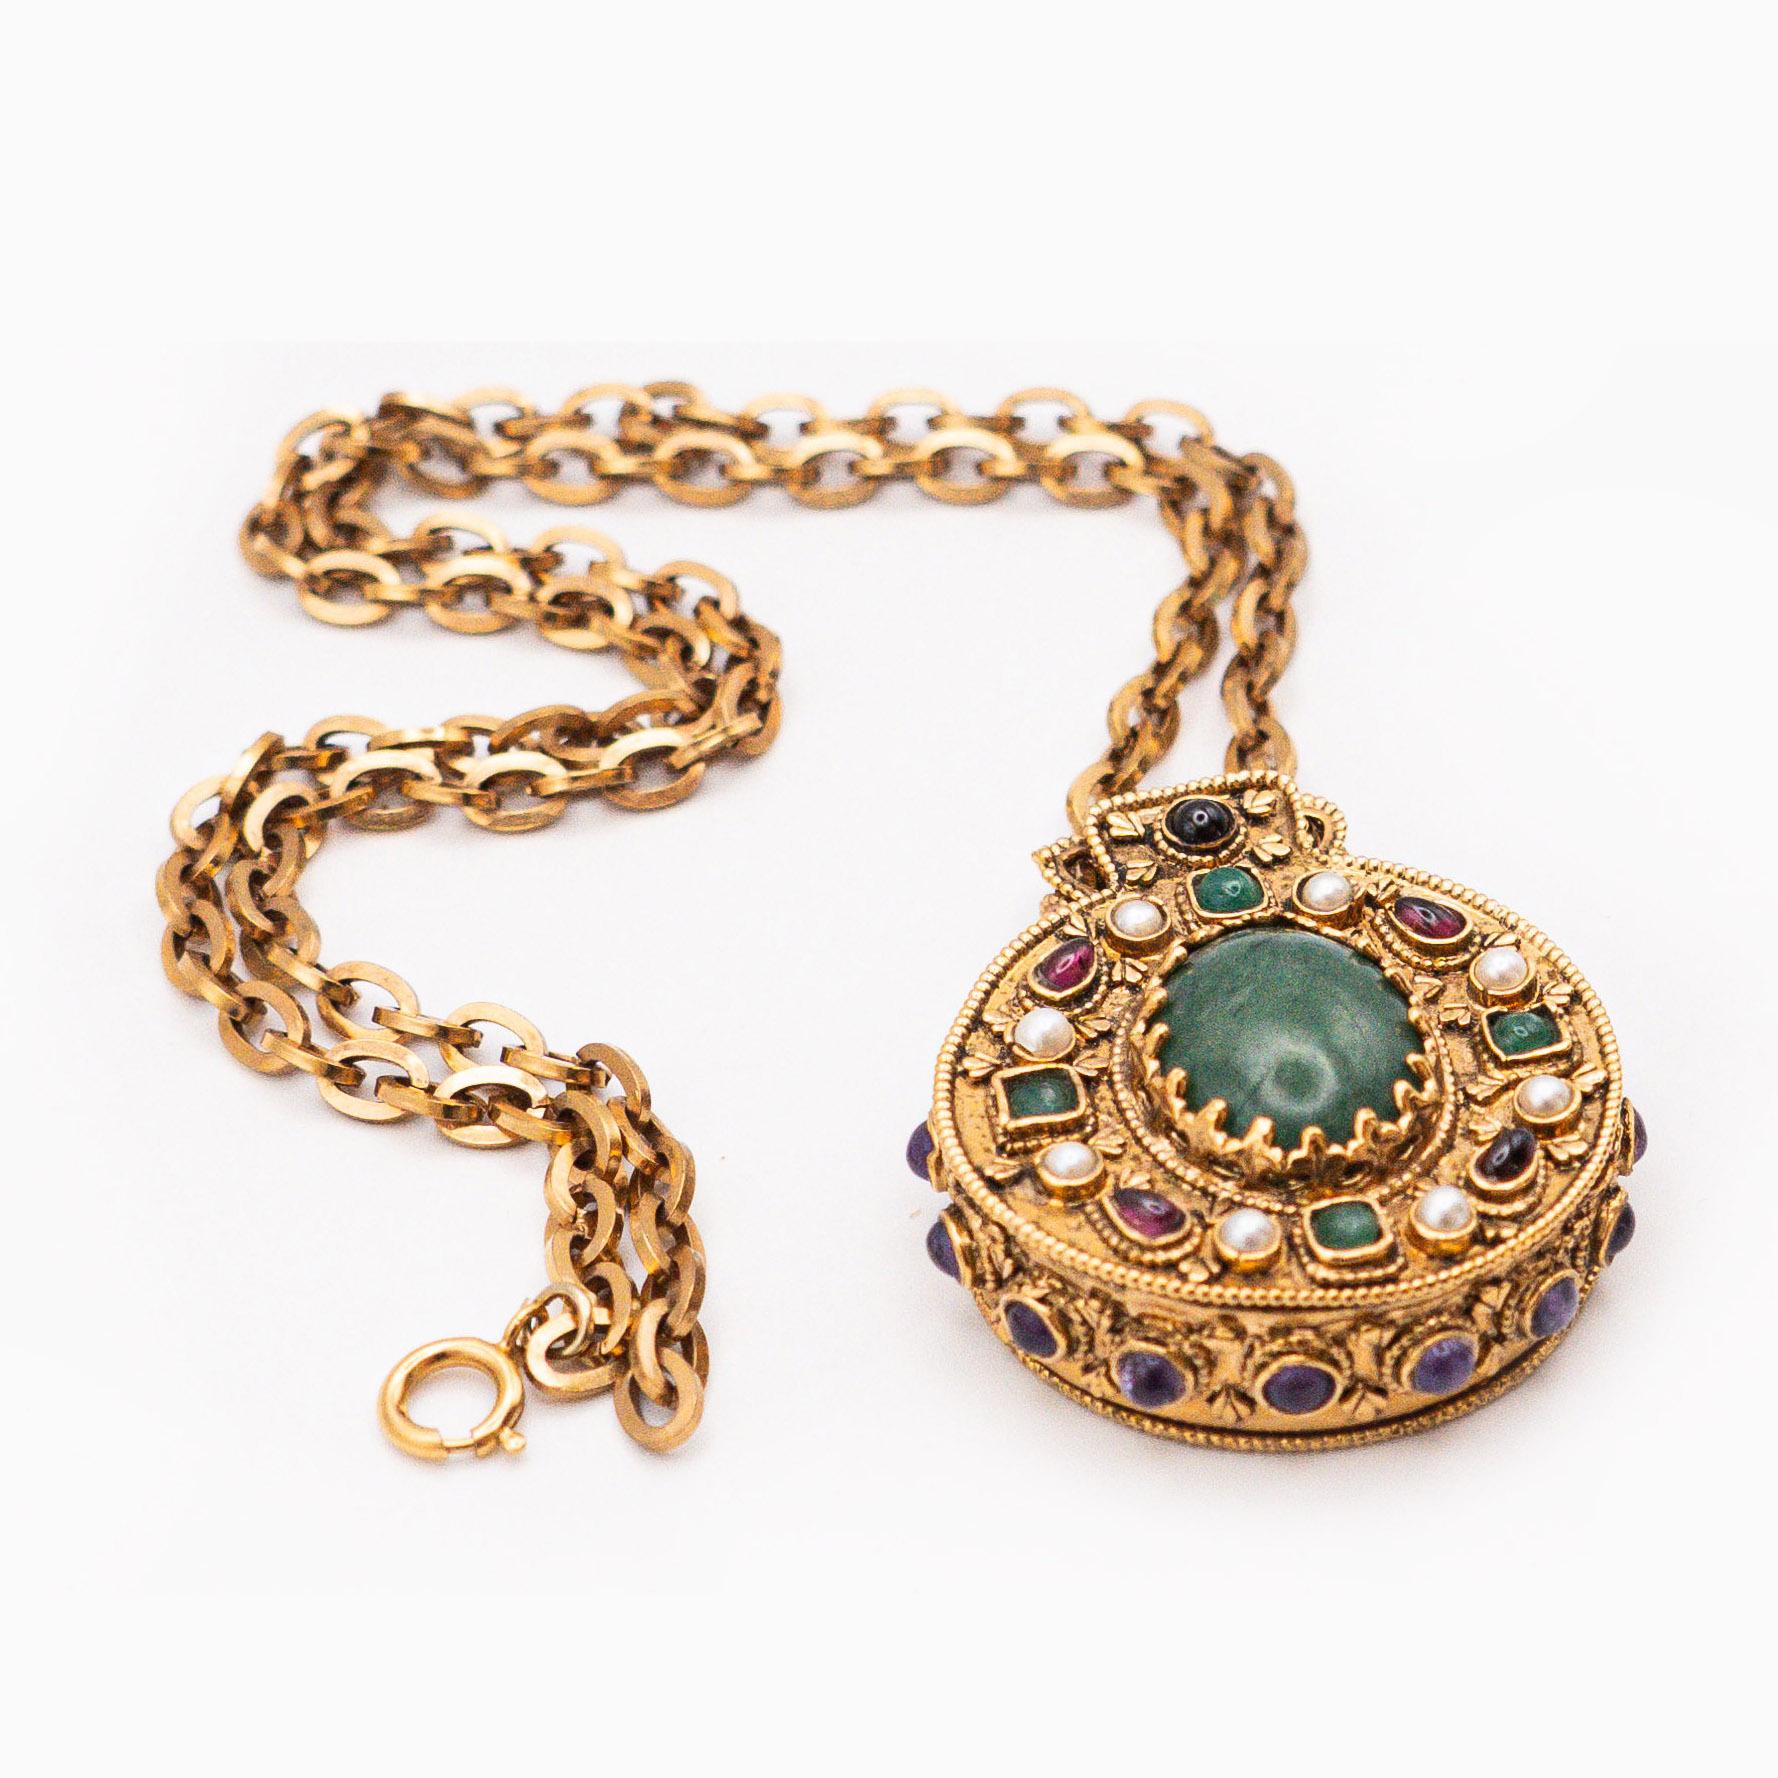 Baroque Revival Reliquaire Necklace by Chanel For Sale